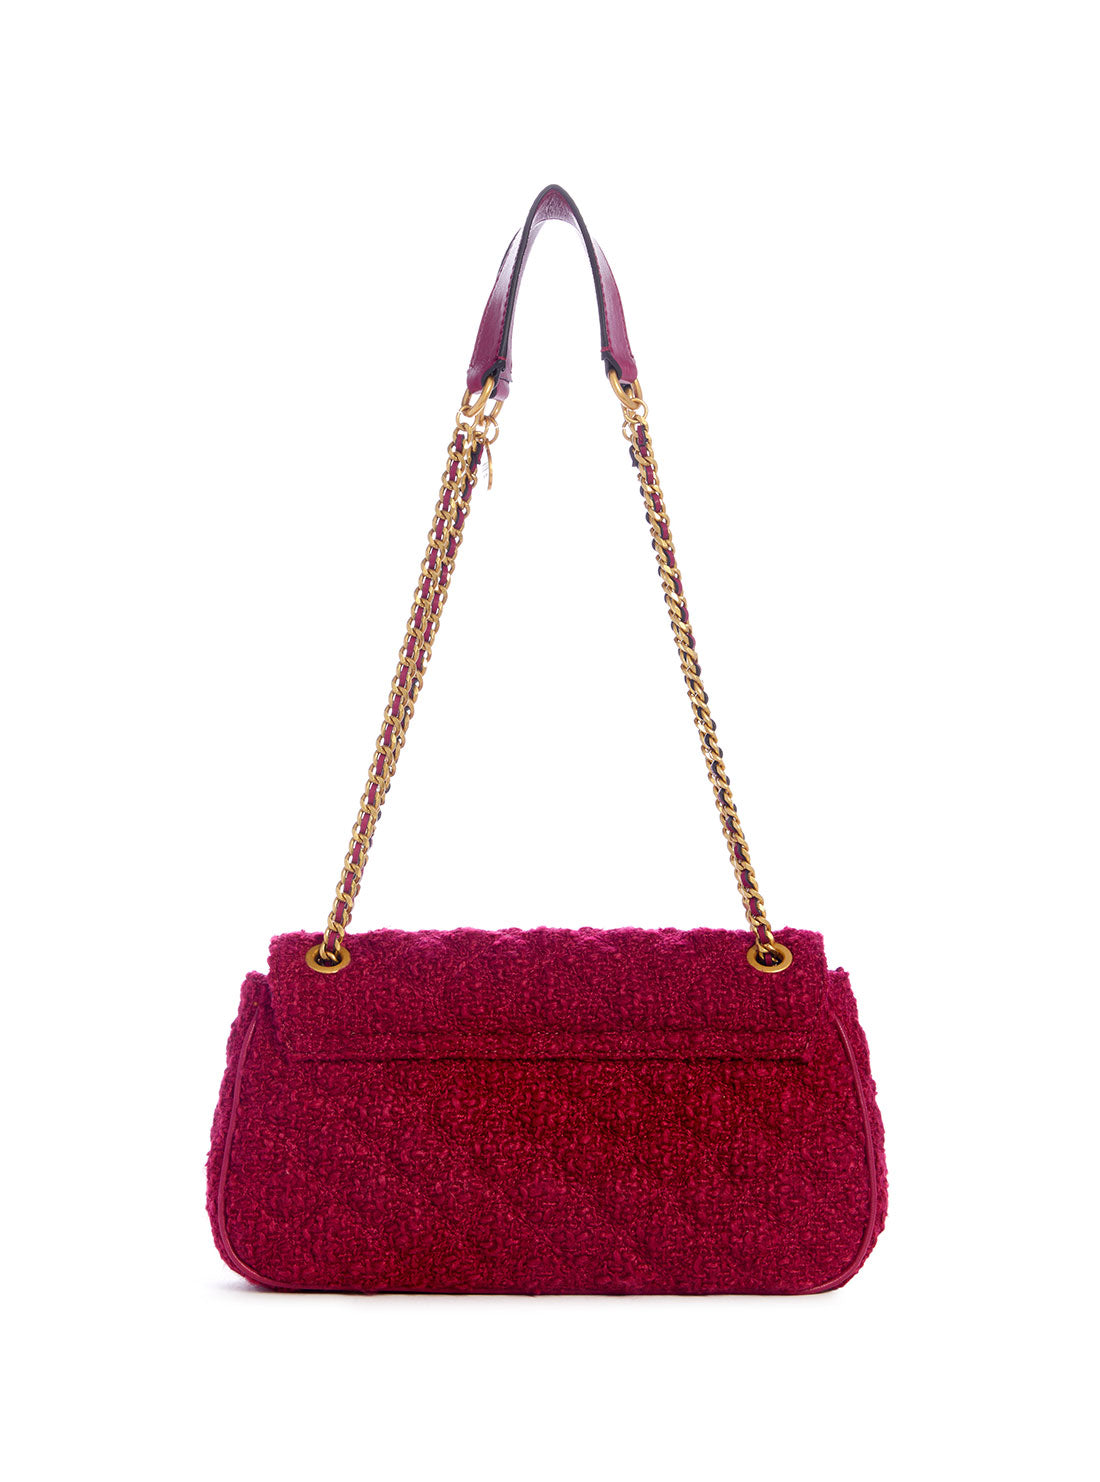 GUESS Women's Boysenberry Giully Crossbody Bag TY874821 Back View